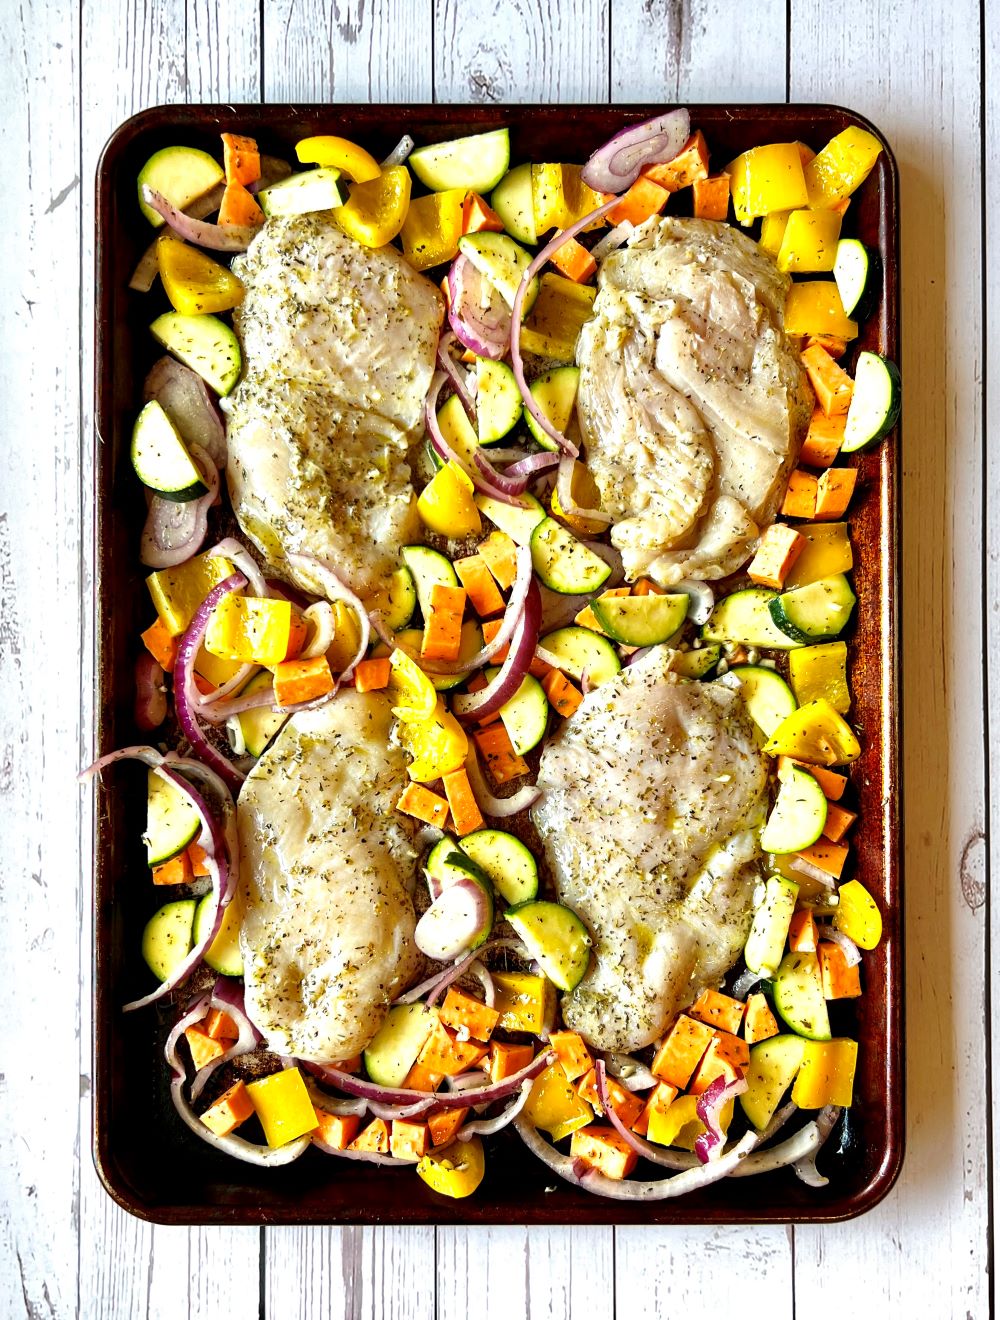 Chicken and veggies assembled on large sheet pan before roasting in the oven. 